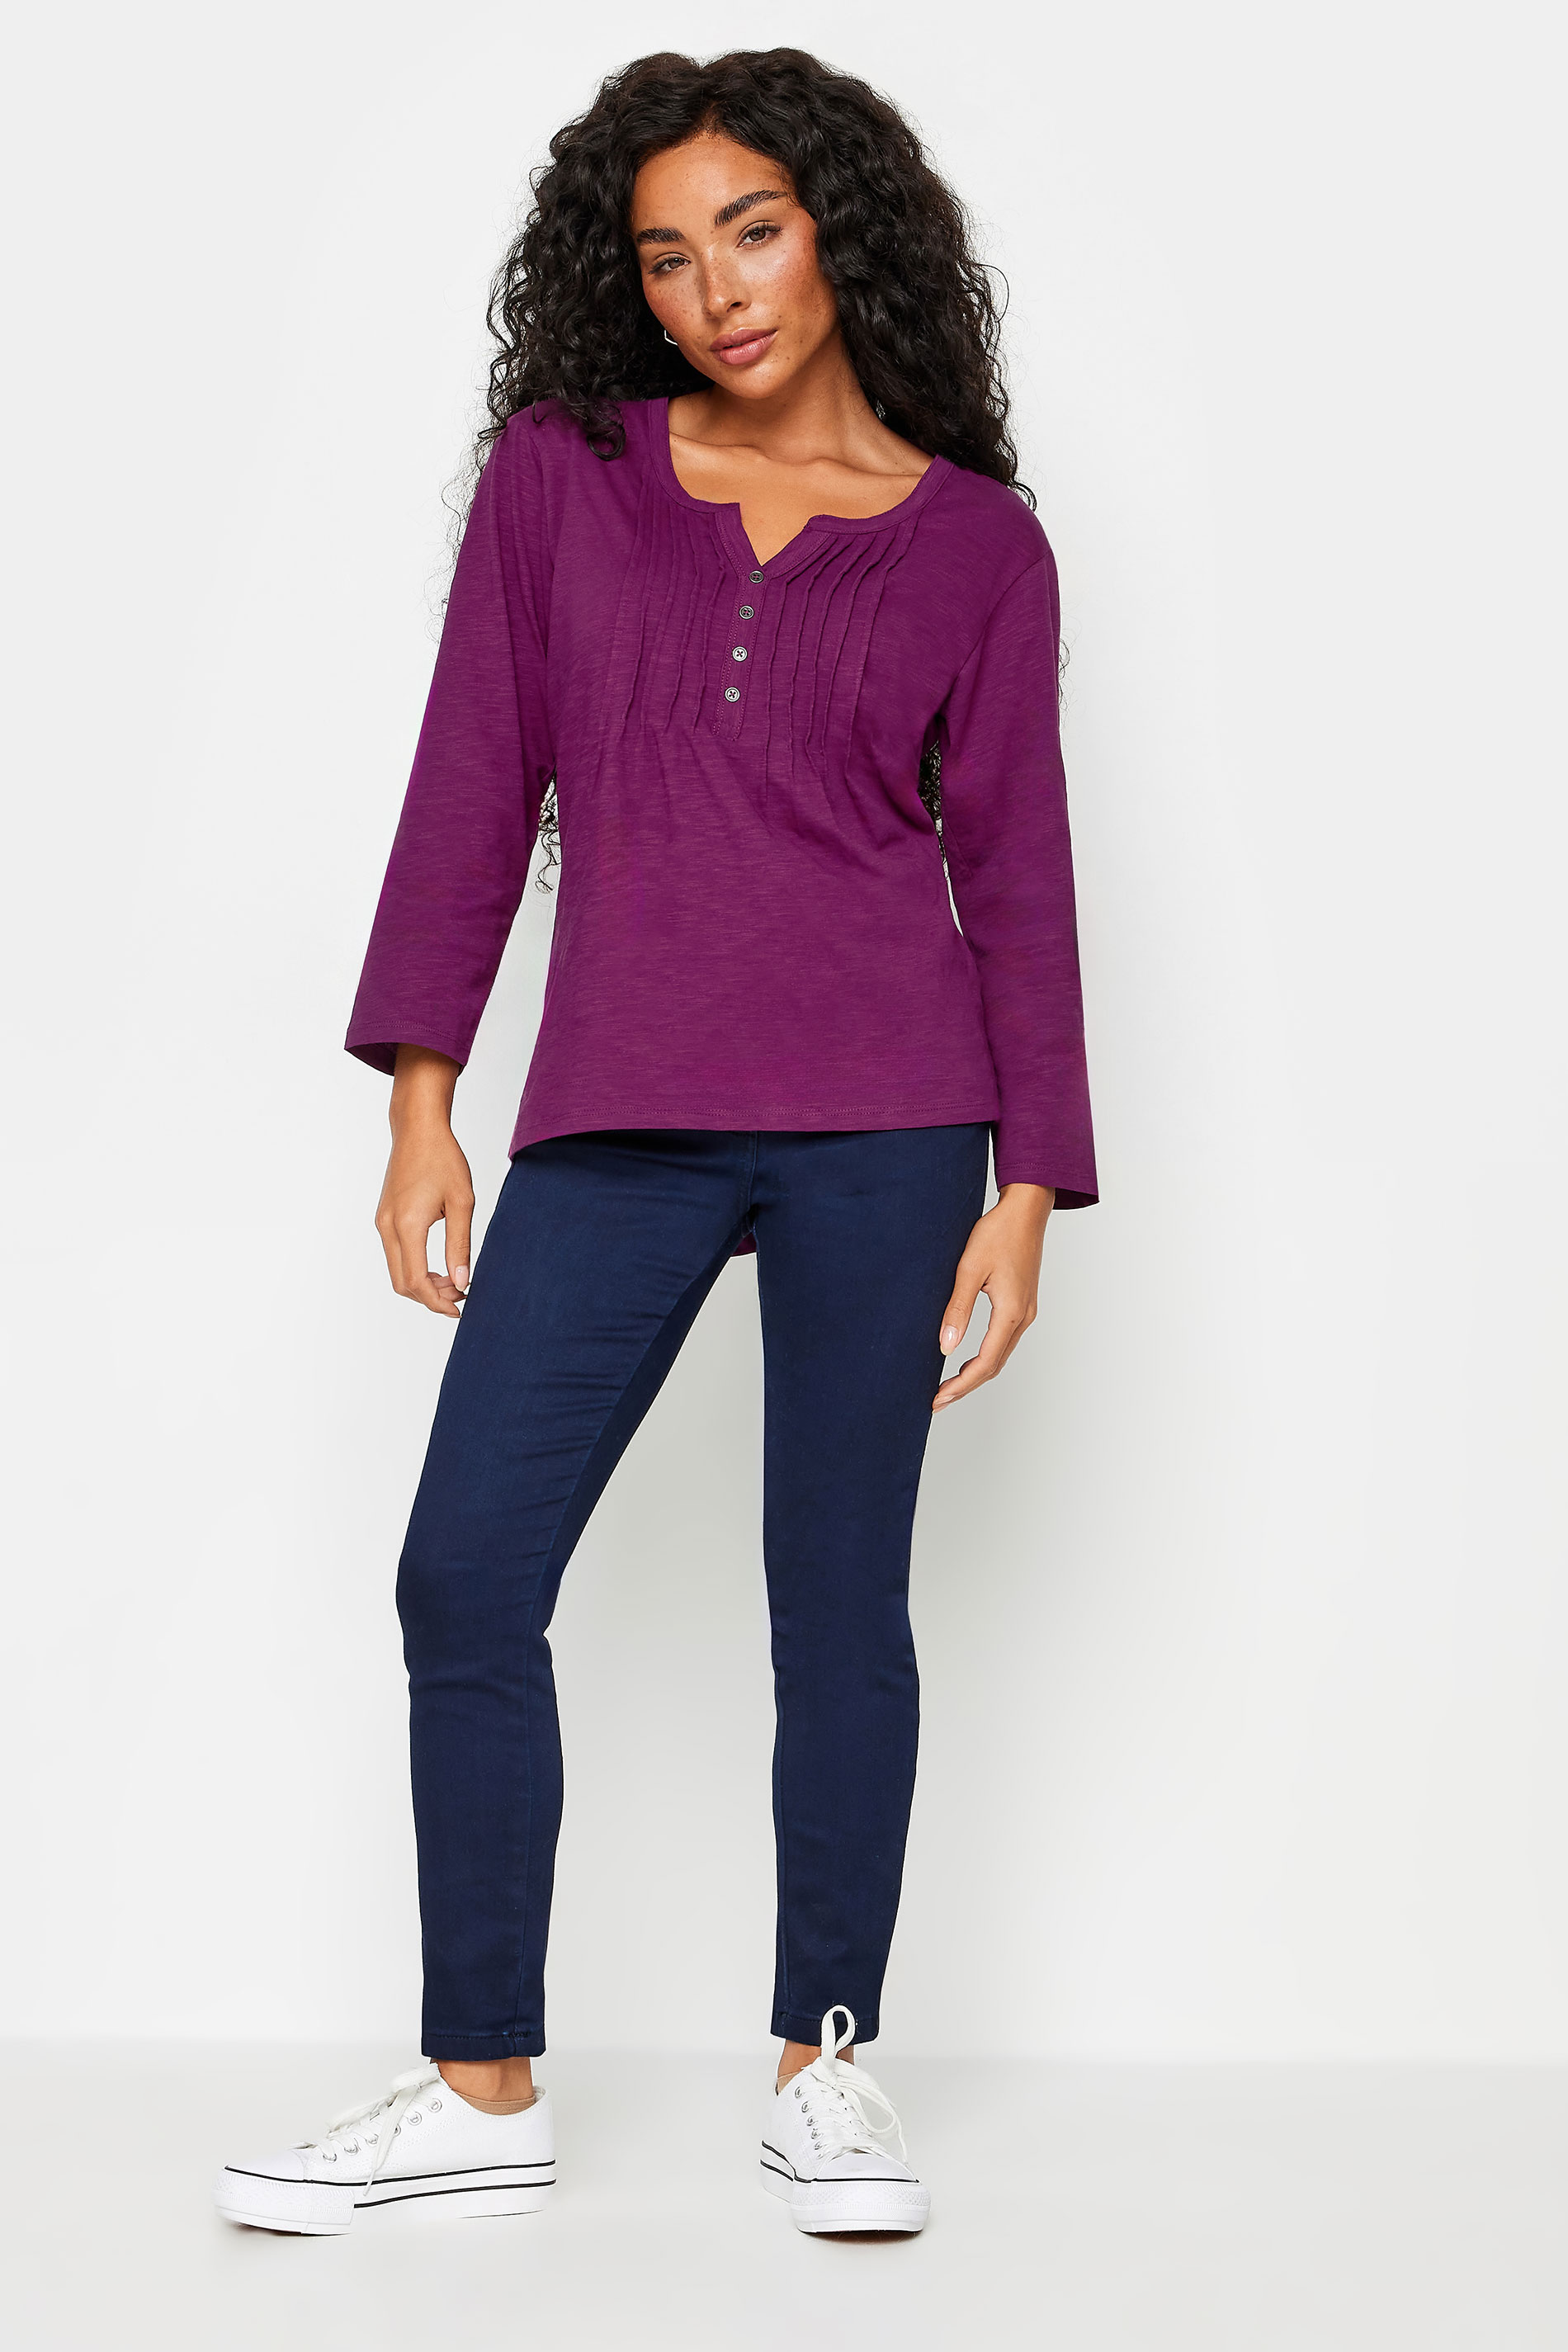 M&Co Petite Berry Red Cotton Henley Top | M&Co 2